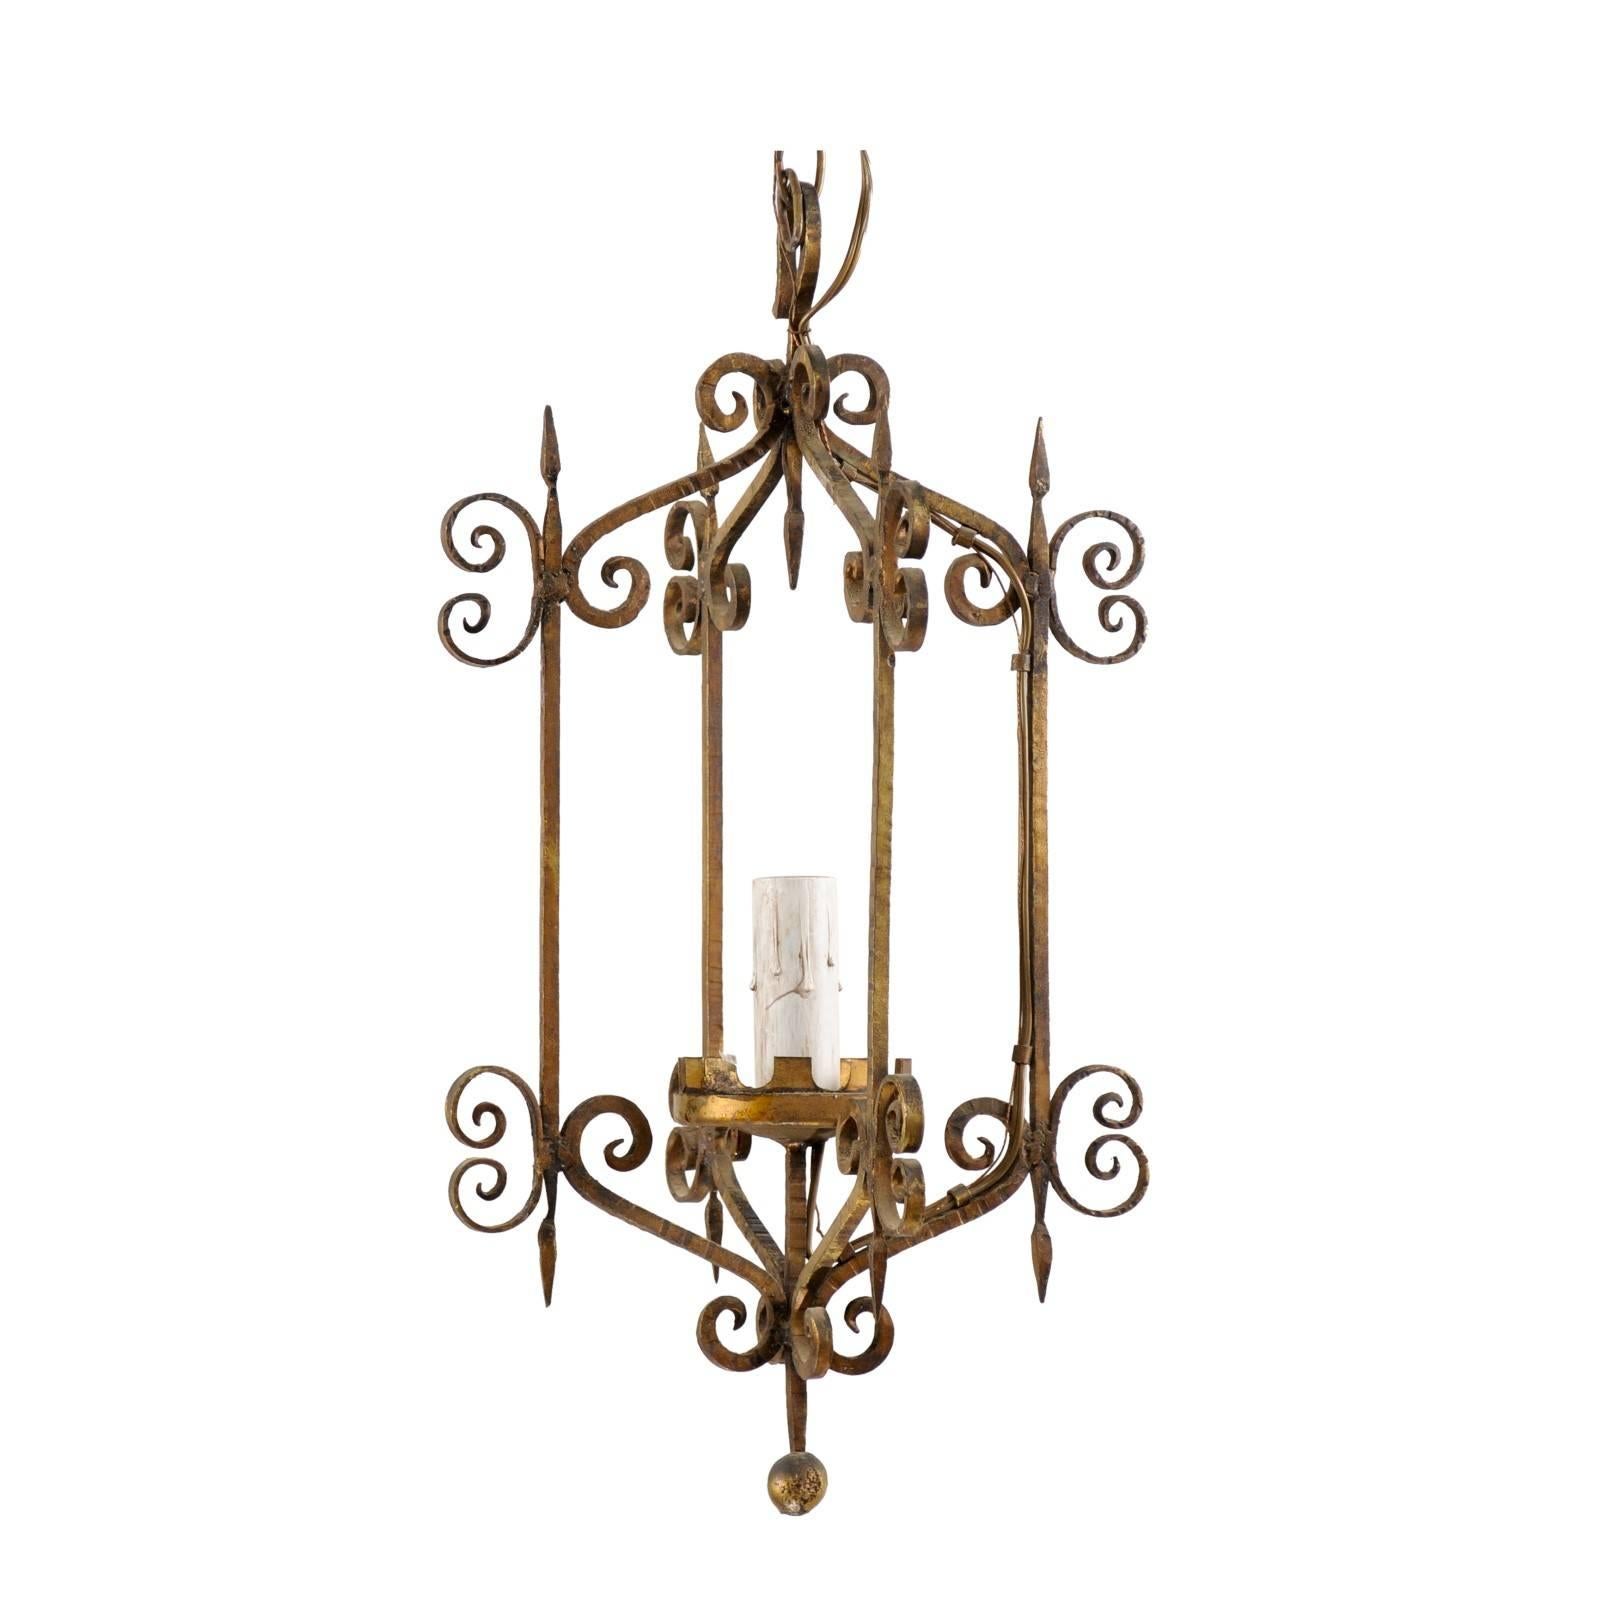 French Mid-20th Century Single Light Scrolled Iron Chandelier in Gold Bronze Hue For Sale